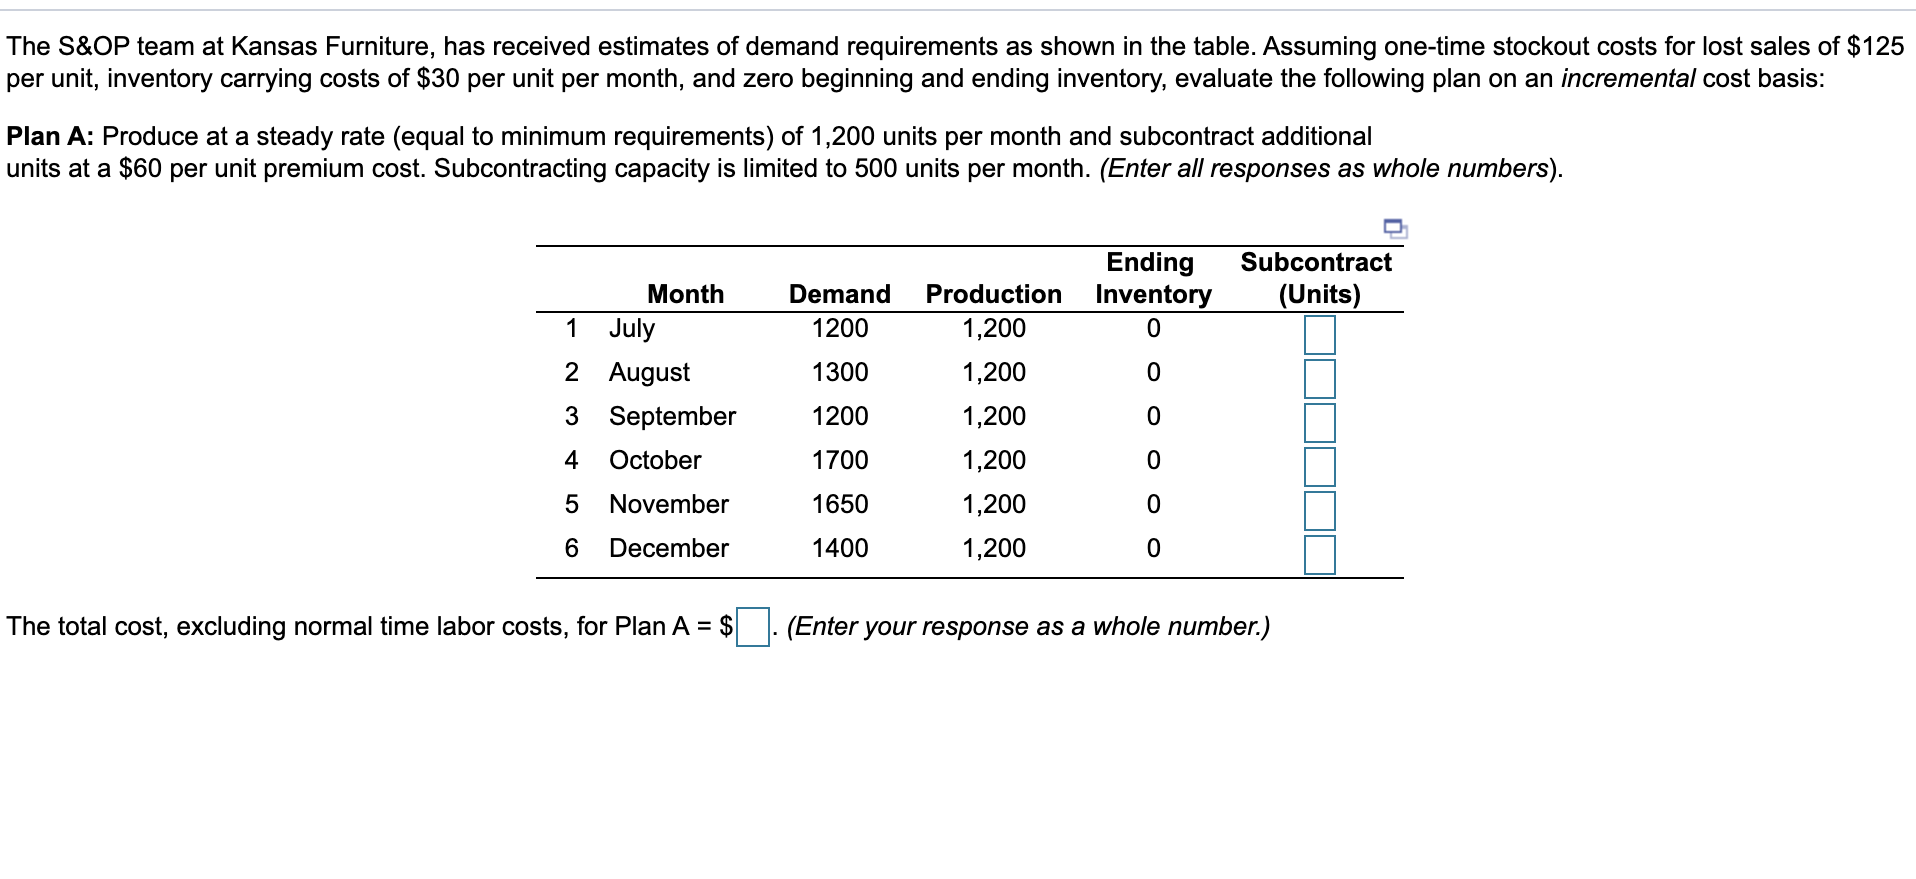 The S&OP team at Kansas Furniture, has received estimates of demand requirements as shown in the table. Assuming one-time stockout costs for lost sales of $125
per unit, inventory carrying costs of $30 per unit per month, and zero beginning and ending inventory, evaluate the following plan on an incremental cost basis:
Plan A: Produce at a steady rate (equal to minimum requirements) of 1,200 units per month and subcontract additional
units at a $60 per unit premium cost. Subcontracting capacity is limited to 500 units per month. (Enter all responses as whole numbers).
Ending
Subcontract
Month
Demand
Production
Inventory
(Units)
1
July
1200
1,200
2 August
1300
1,200
3 September
1200
1,200
4
October
1700
1,200
November
1650
1,200
December
1400
1,200
The total cost, excluding normal time labor costs, for Plan A = $
(Enter your response as a whole number.)
